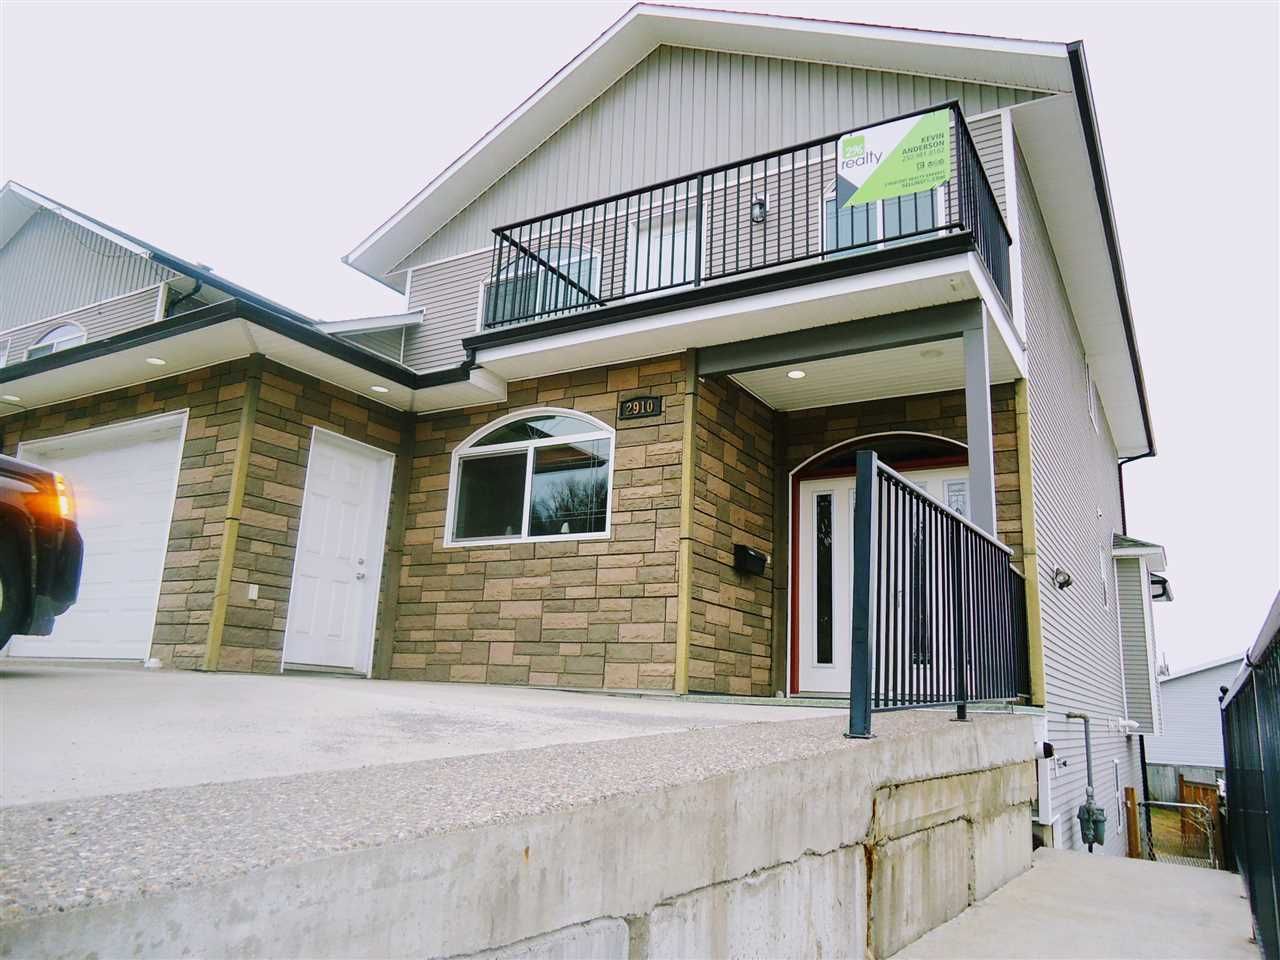 Main Photo: 2910 ANDRES Road in Prince George: Peden Hill 1/2 Duplex for sale (PG City West (Zone 71))  : MLS®# R2360200